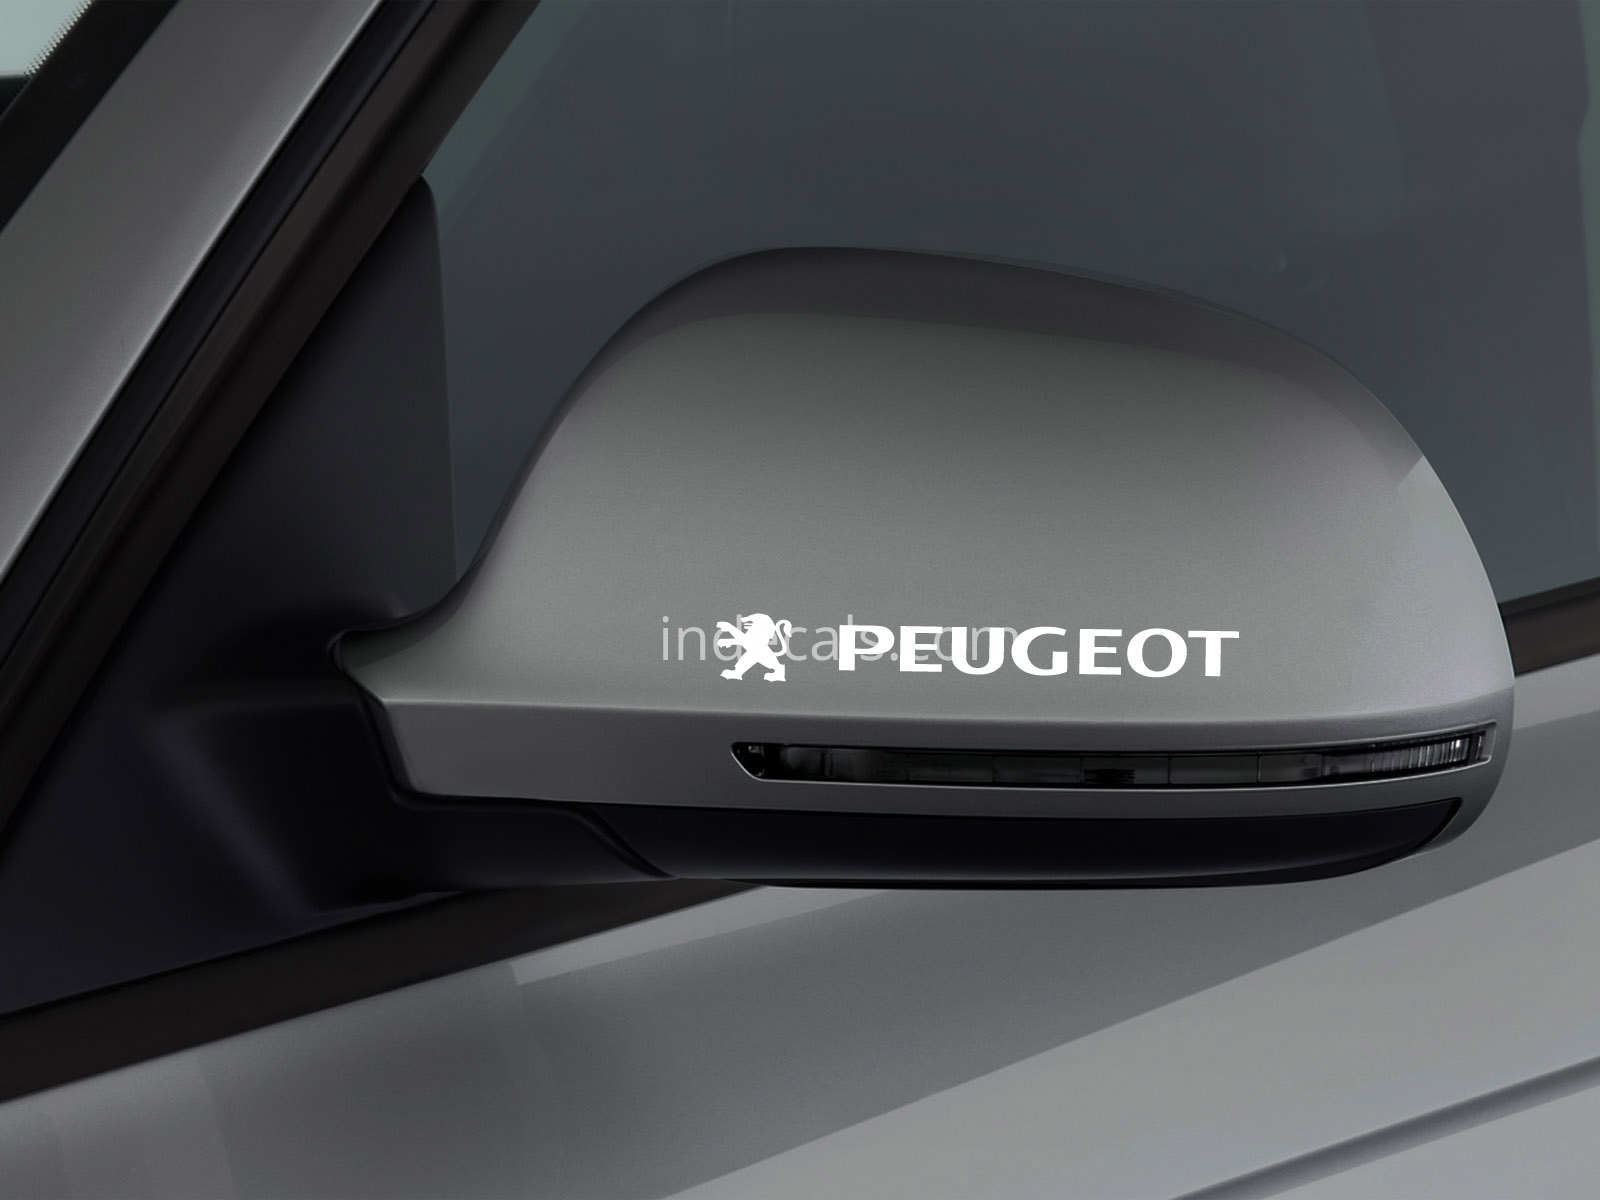 3 x Peugeot Stickers for Mirror - White